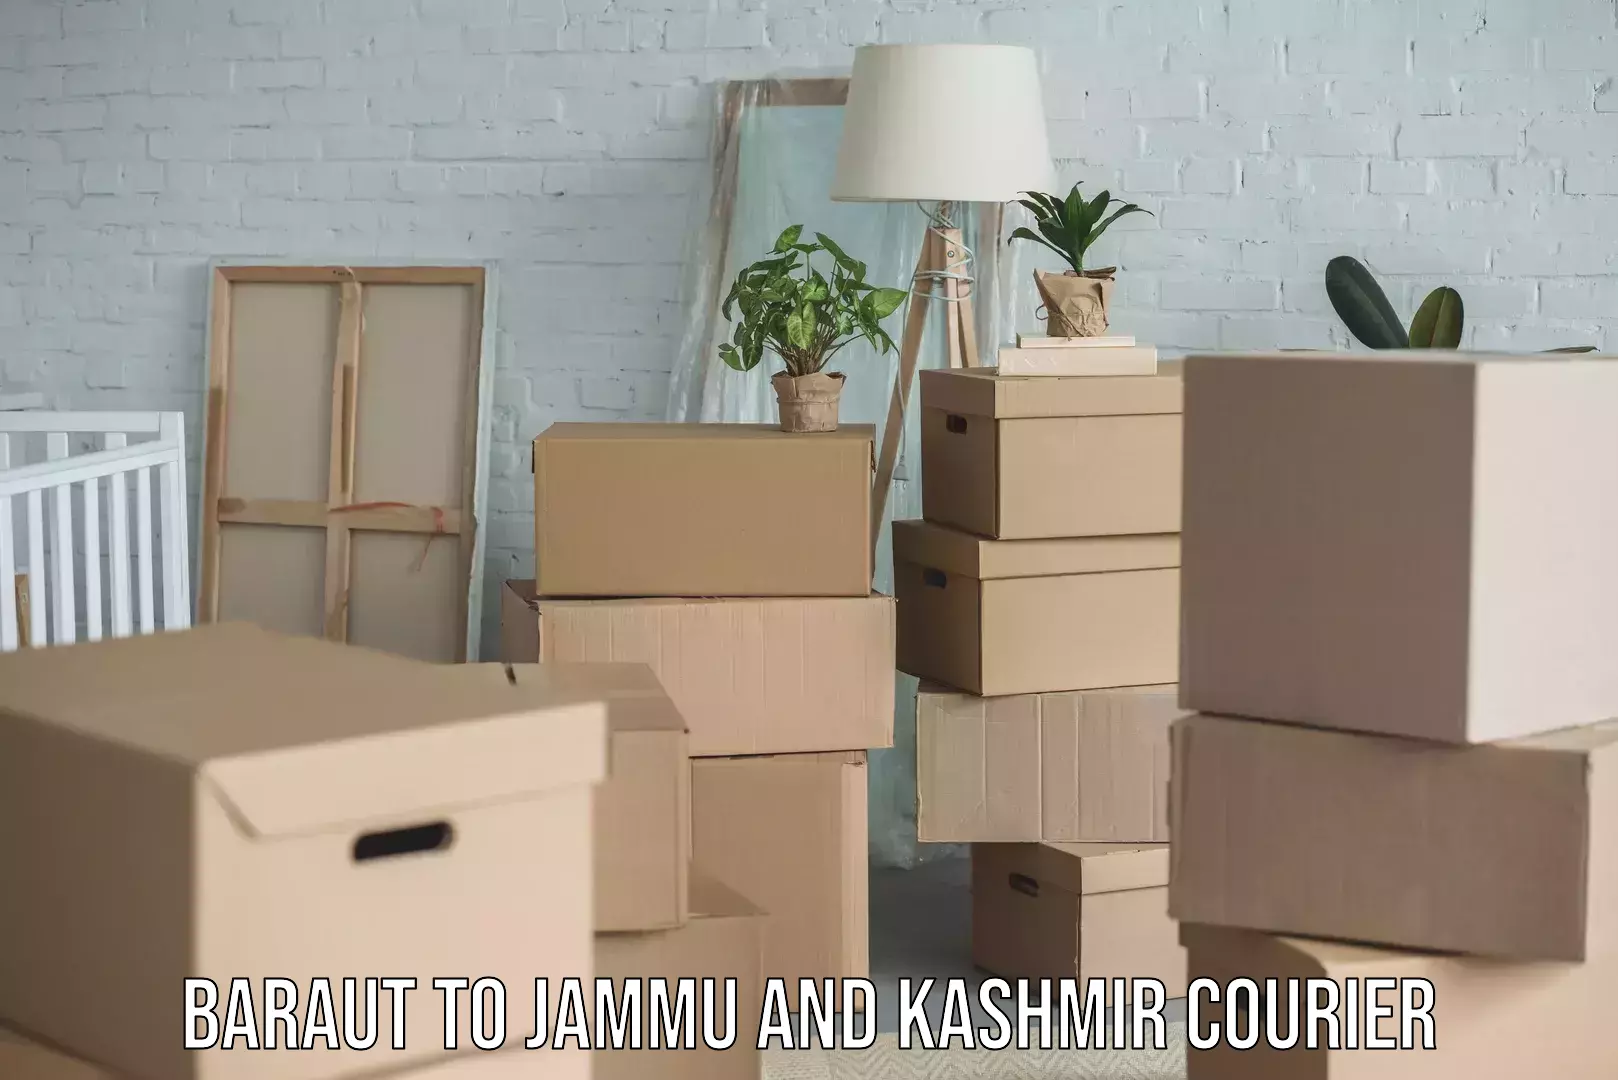 Reliable courier service Baraut to Jammu and Kashmir